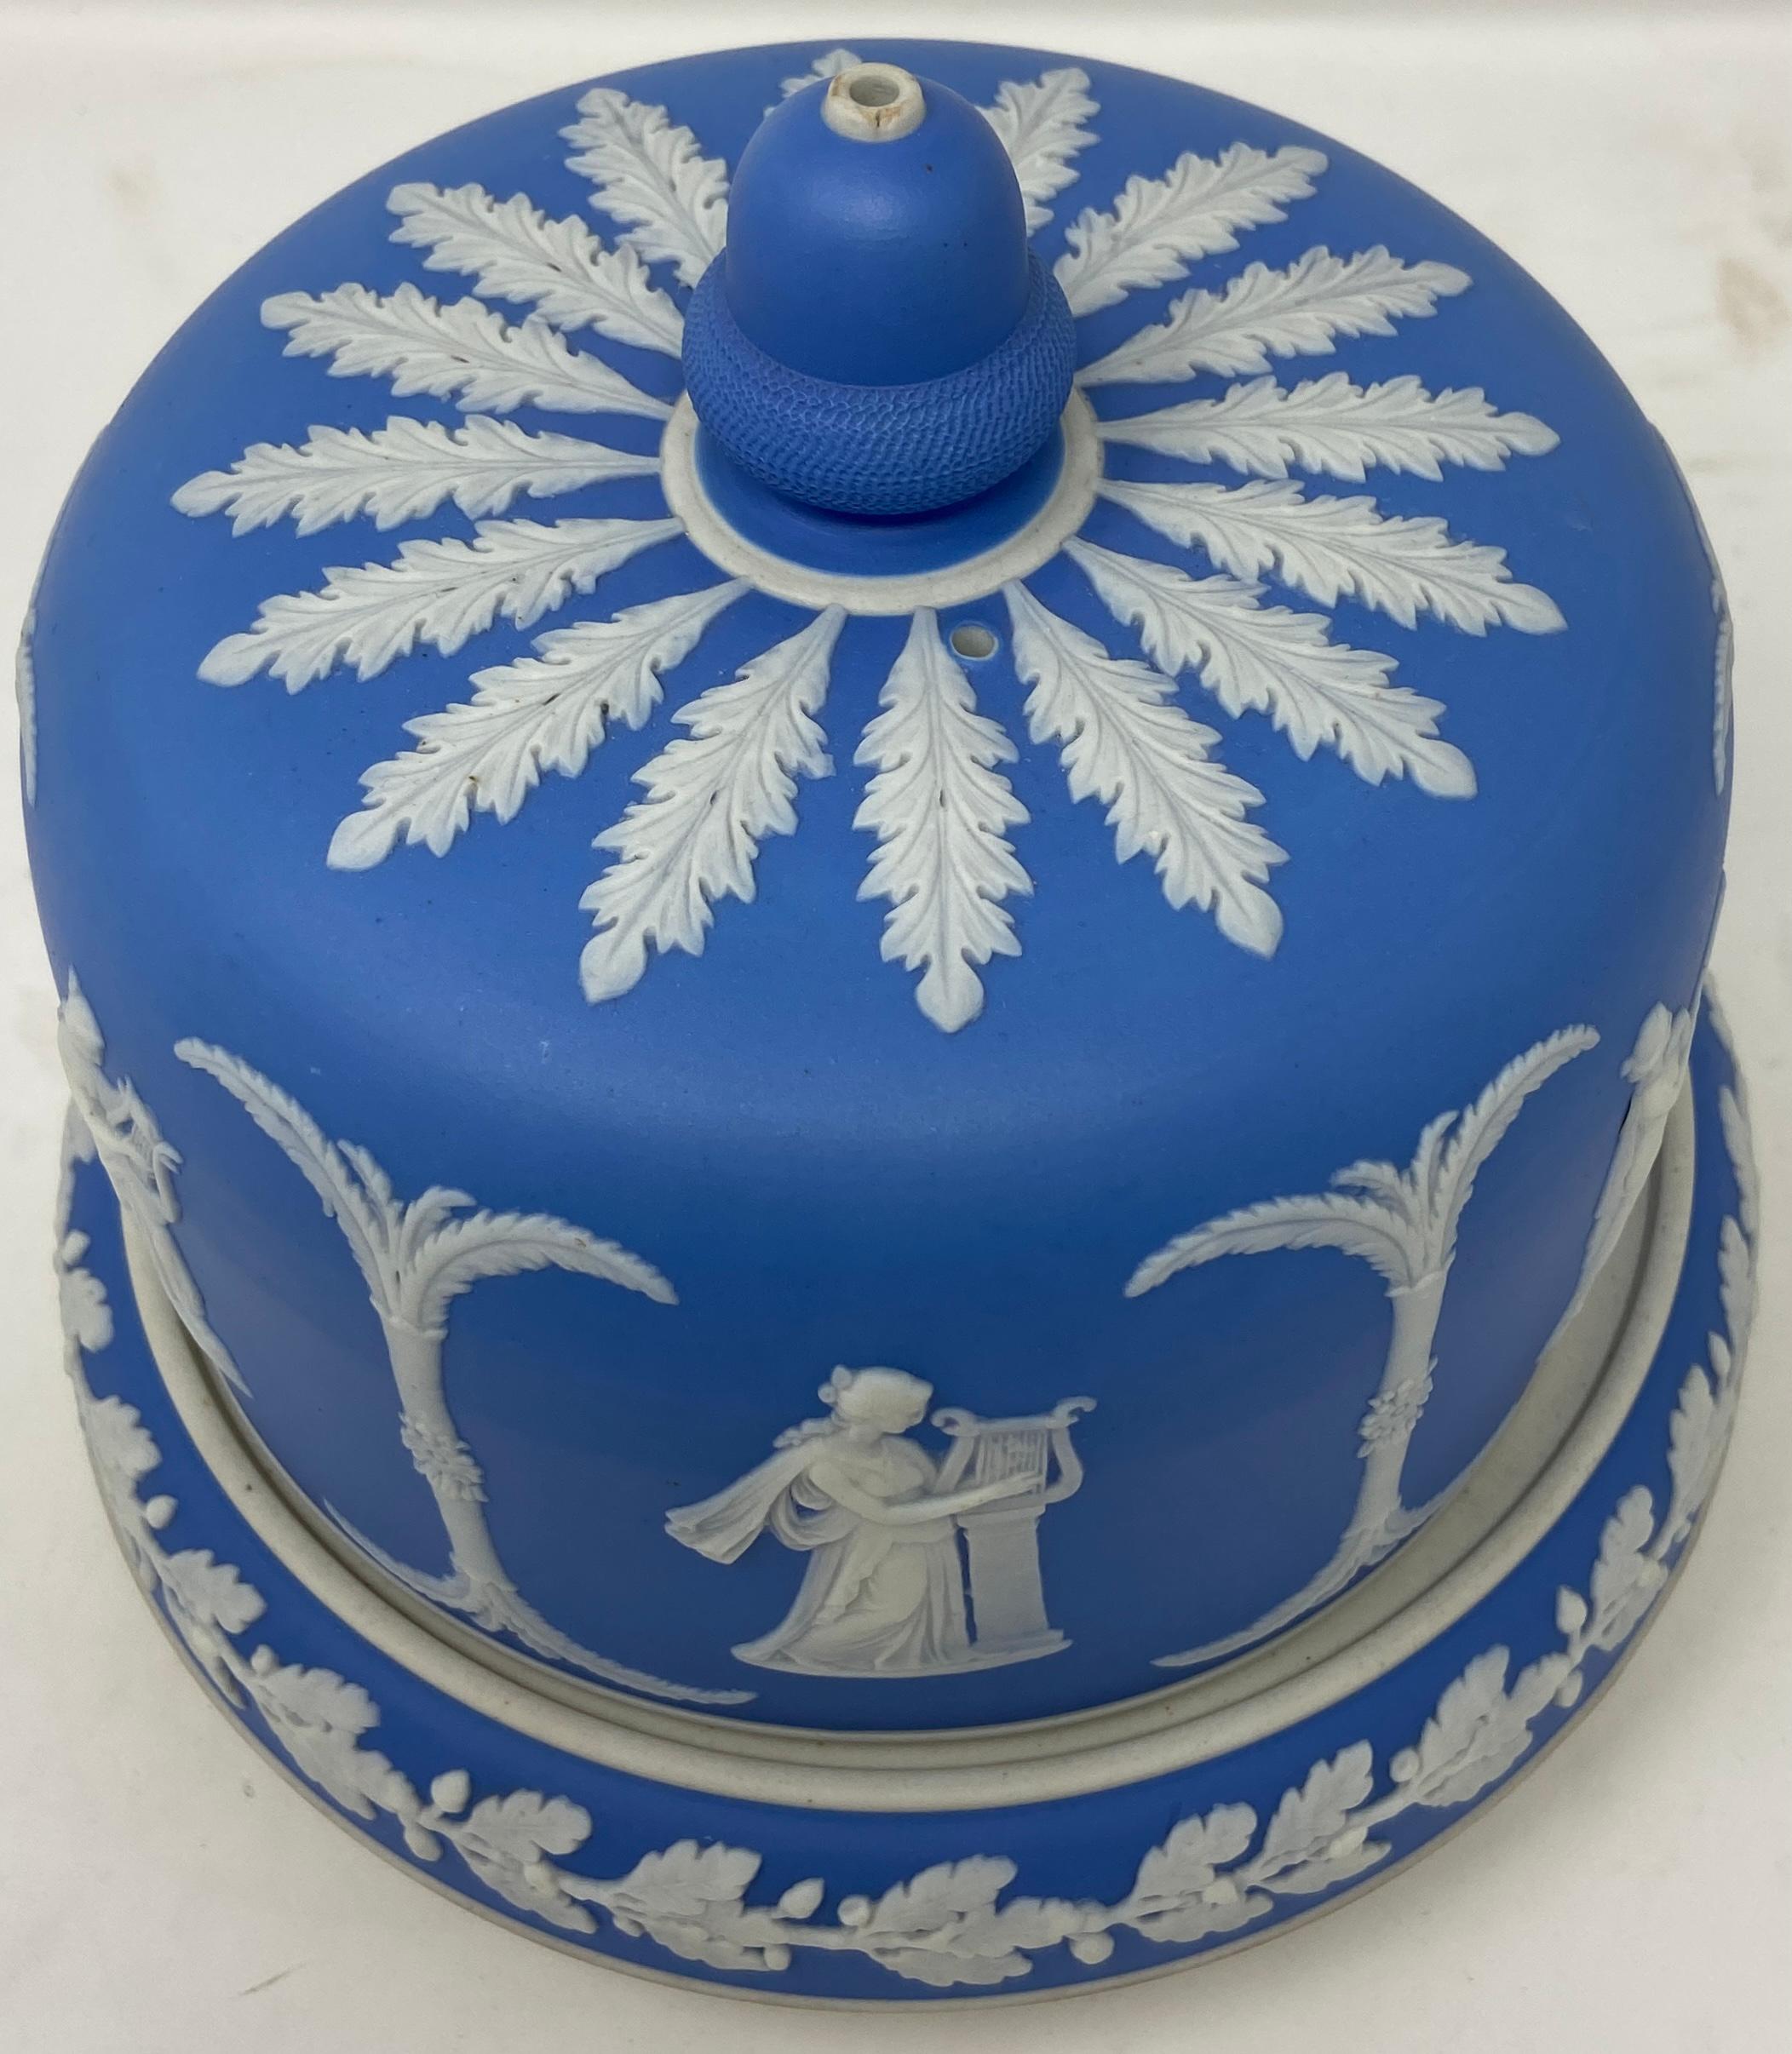 Antique English Wedgwood blue and white porcelain cheese dish and cover, Circa 1895-1910.